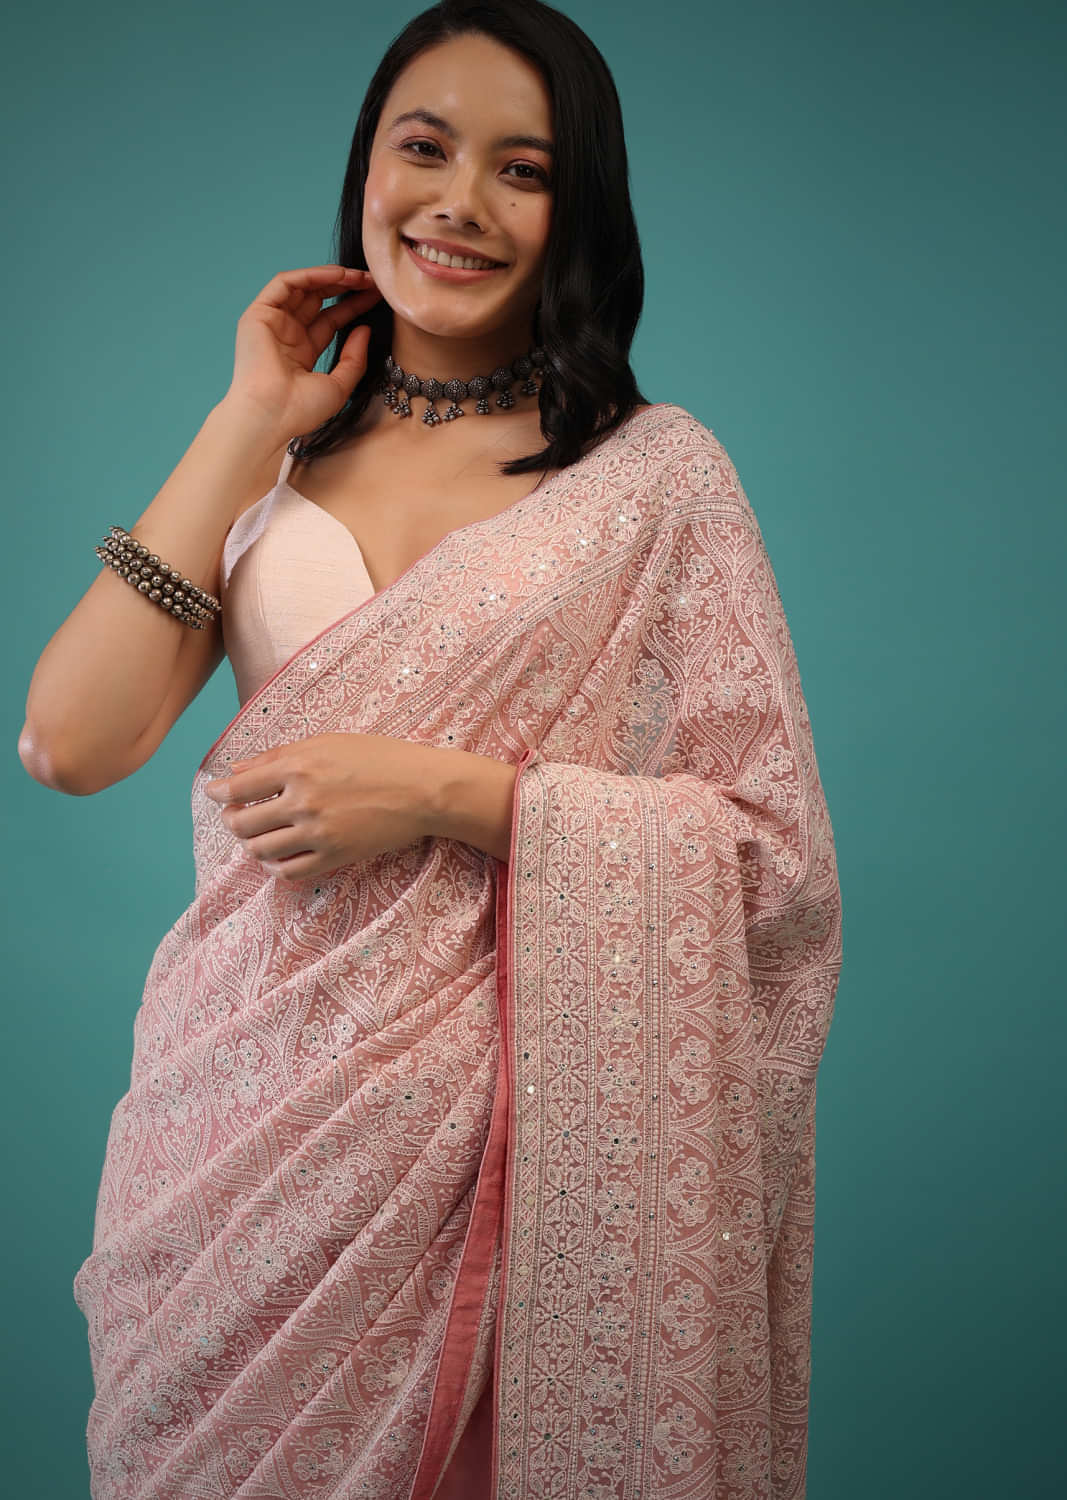 Peach Georgette Saree In Lucknowi Threadwork In A Moroccan Jaal, It Has Sequins, Cut Dana Embroidery Buttis On The Pallu 